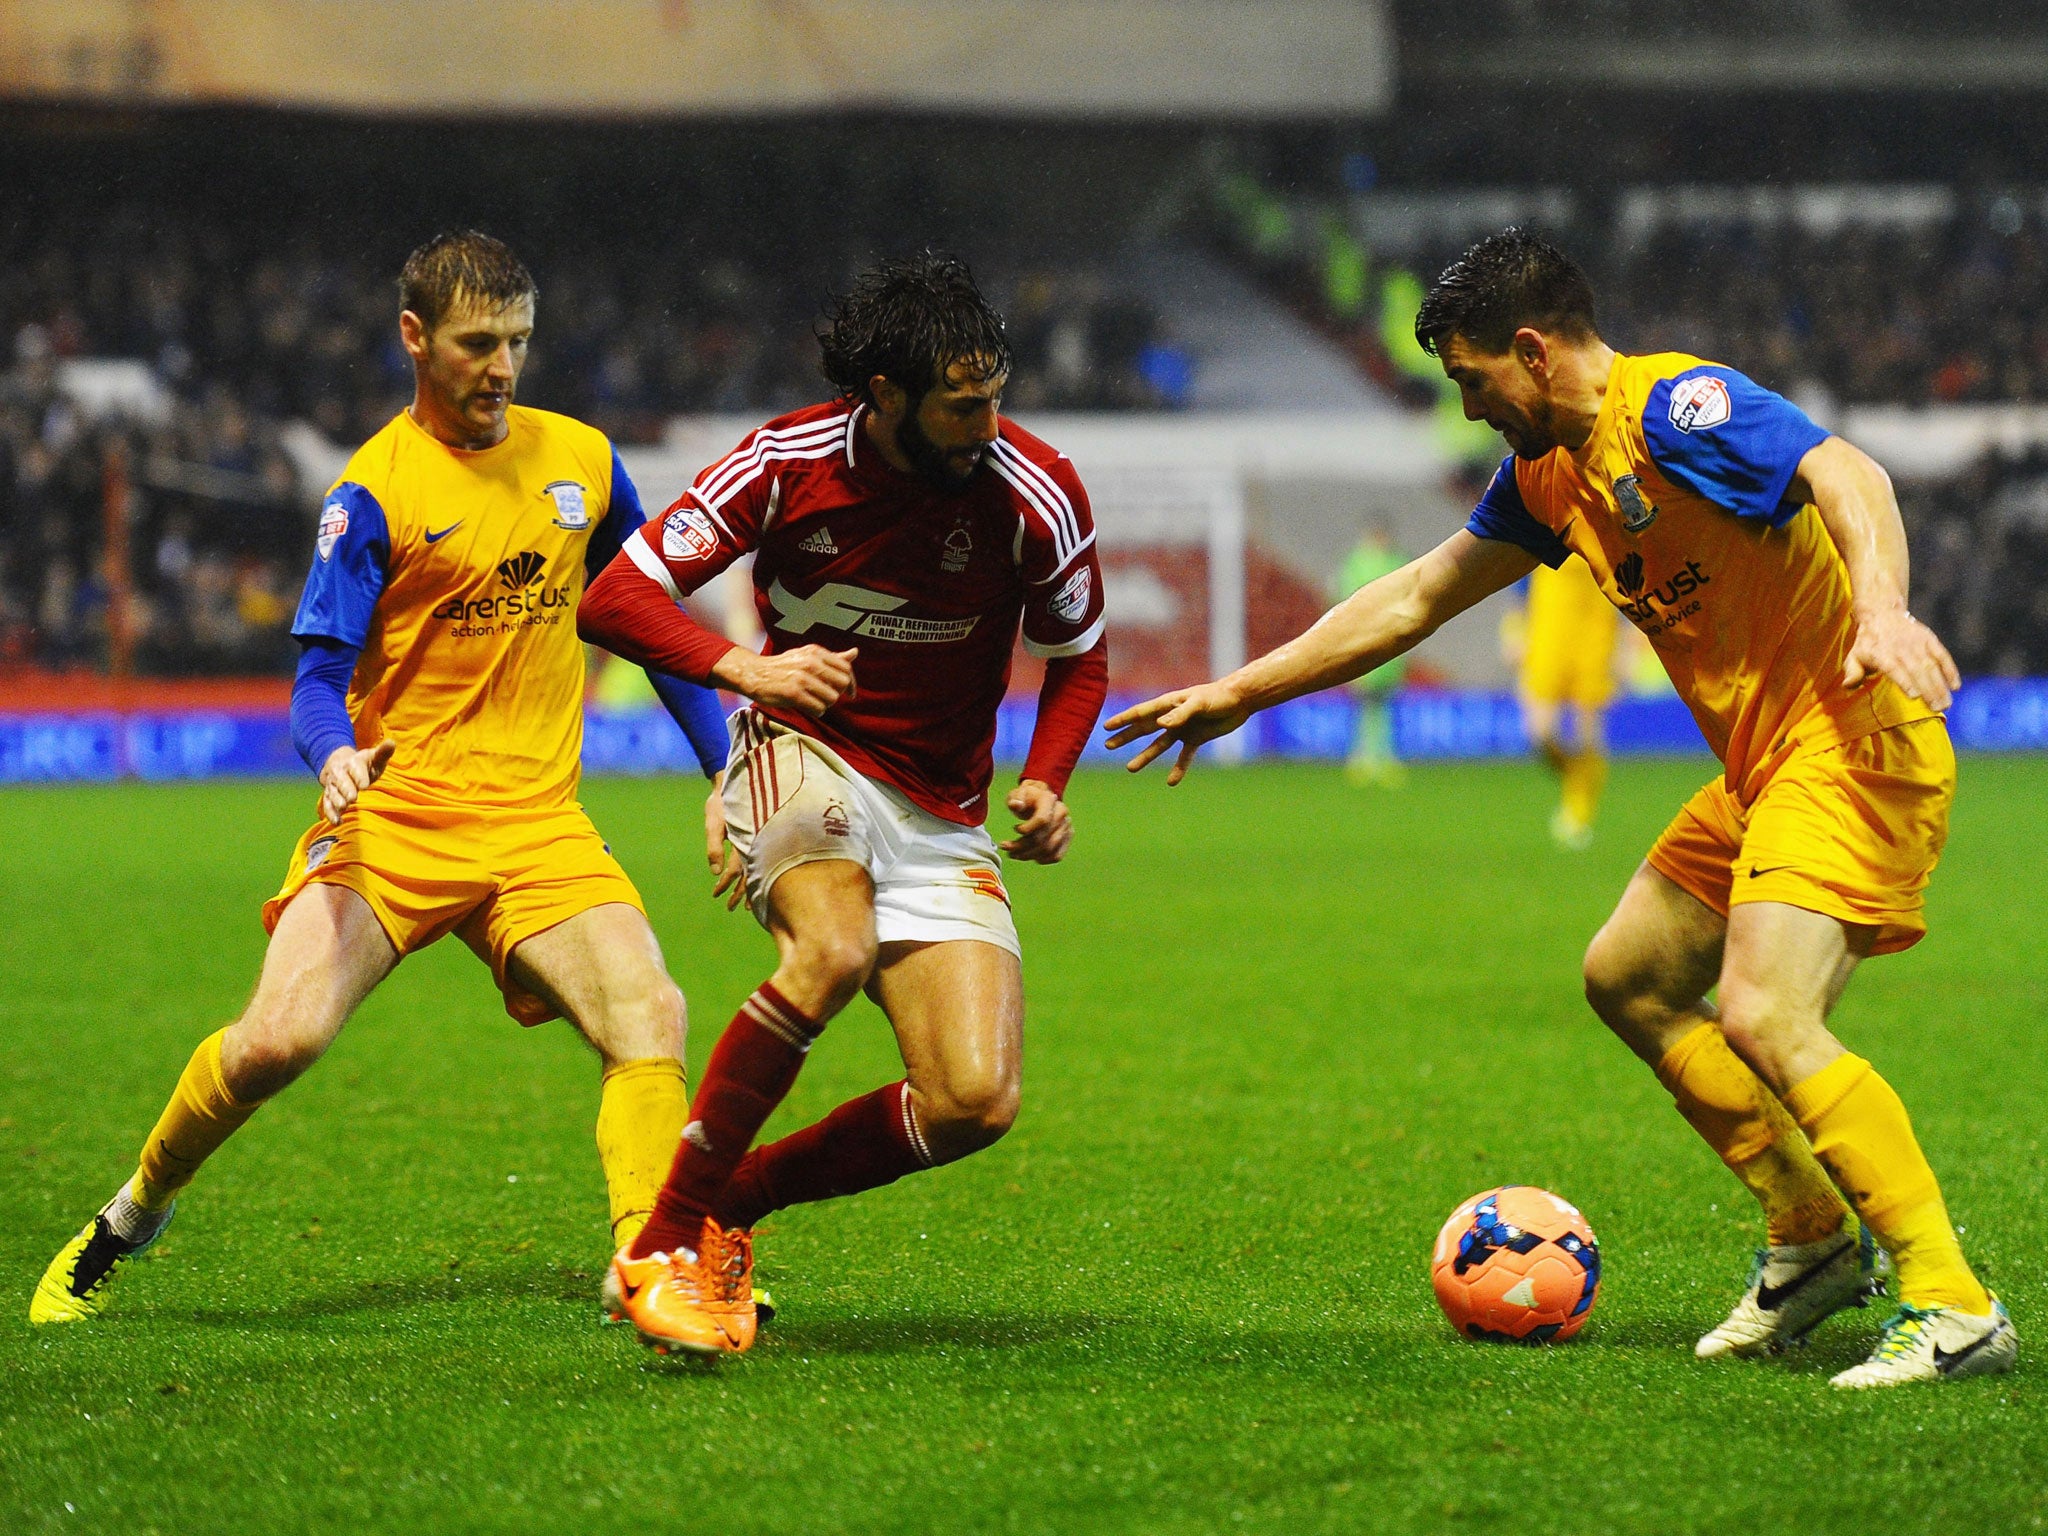 Djamel Abdoun of Nottingham Forest, centre, takes on Paul Gallagher, left, and David Buchanan of Preston North End